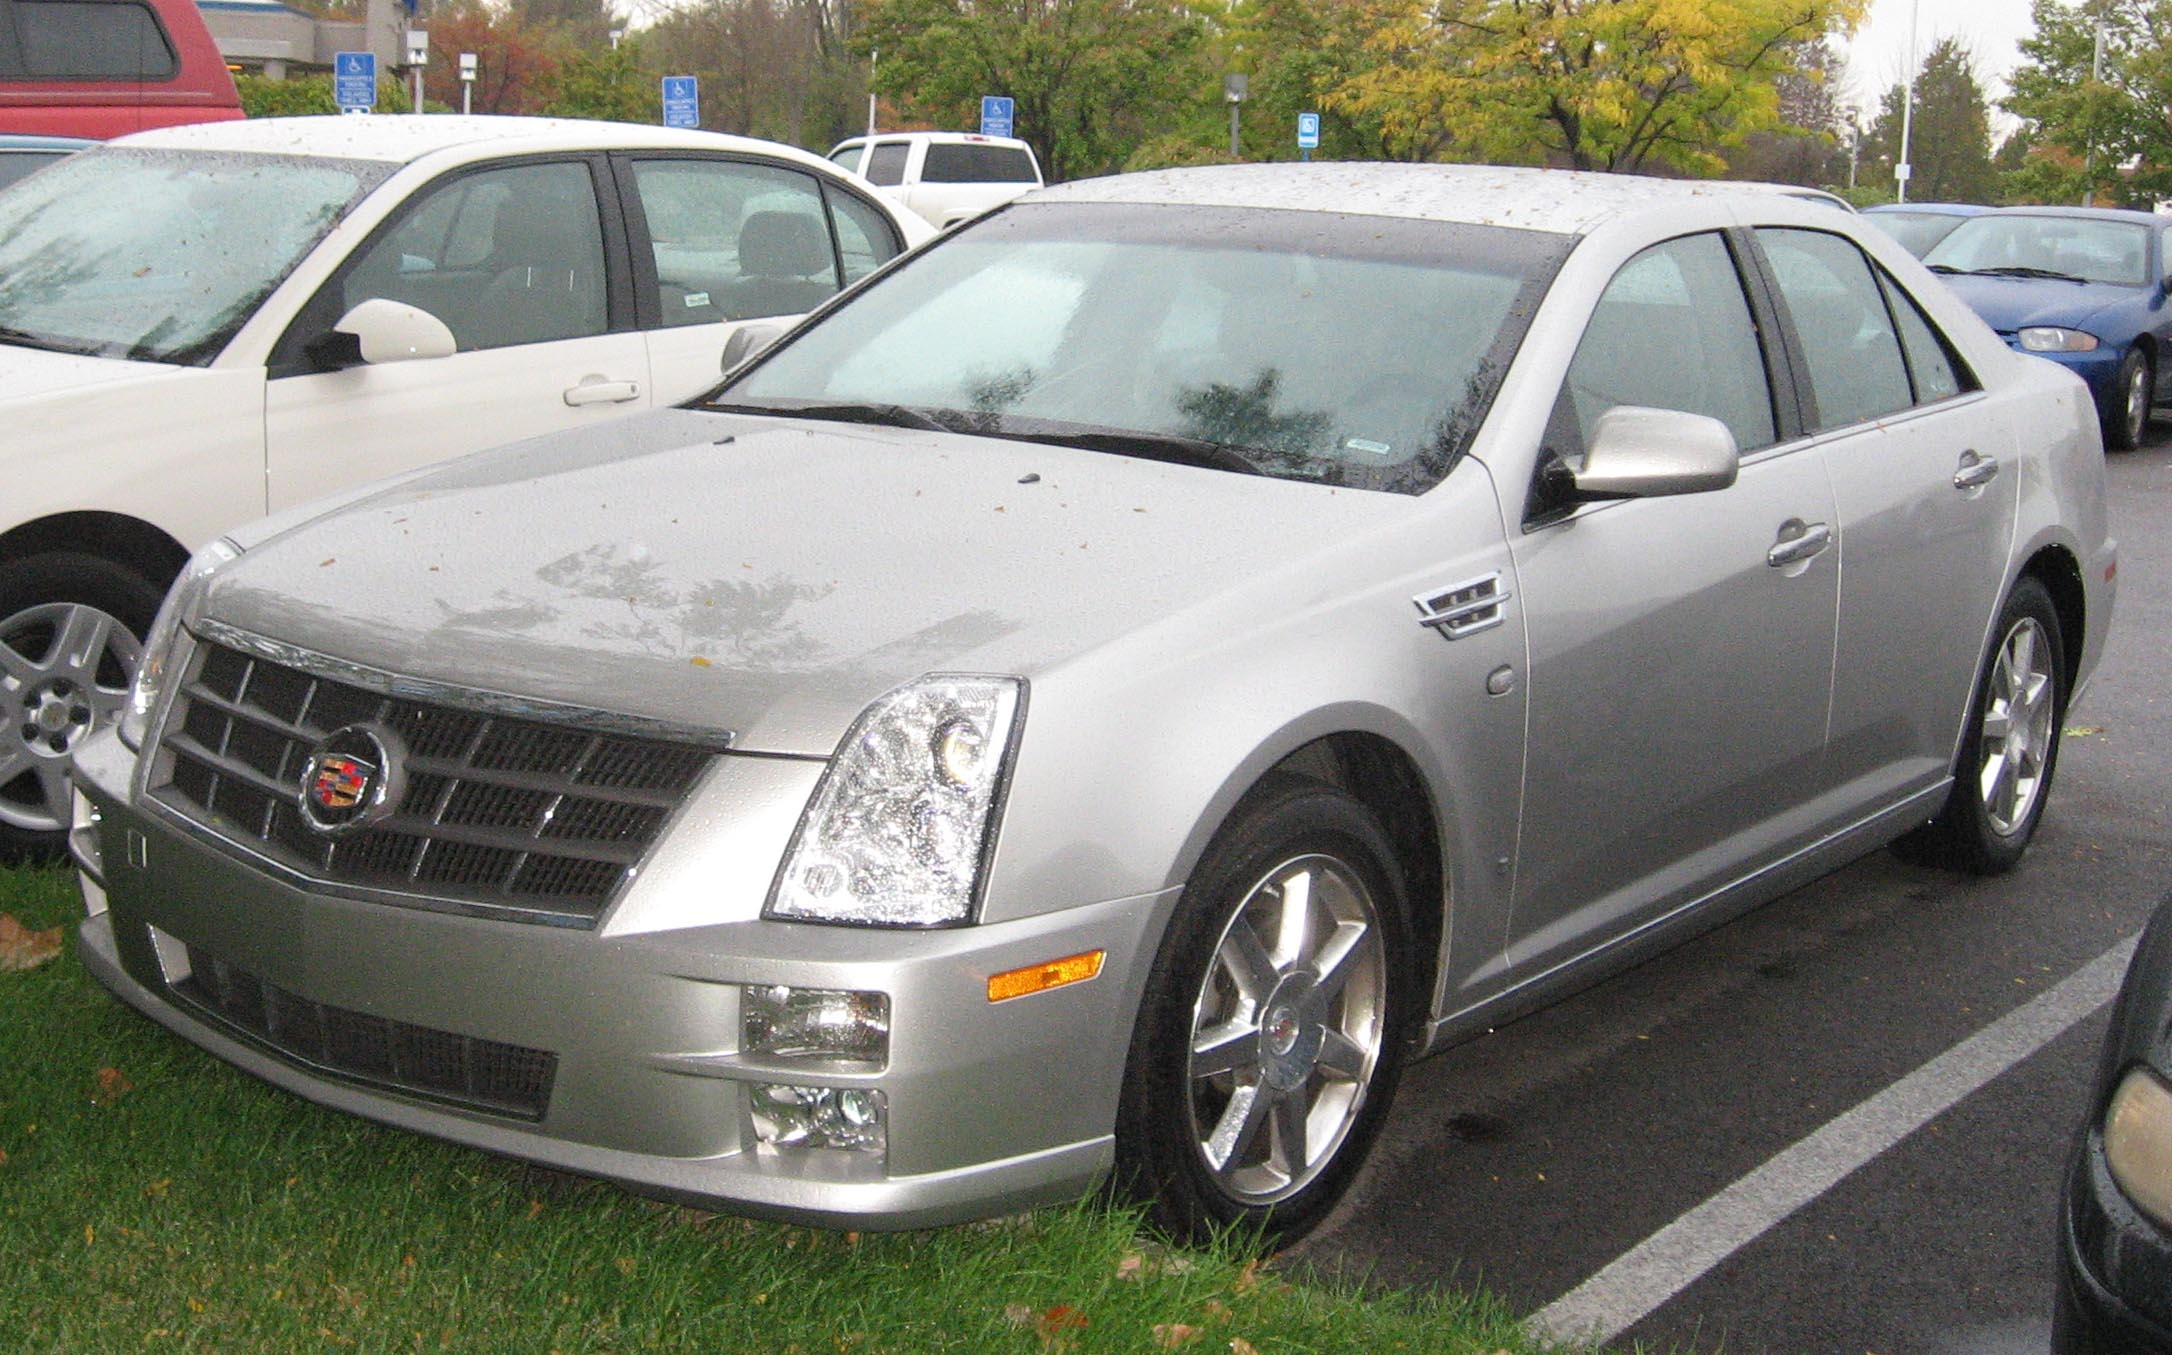 File:2008-Cadillac-STS.jpg - Wikimedia Commons